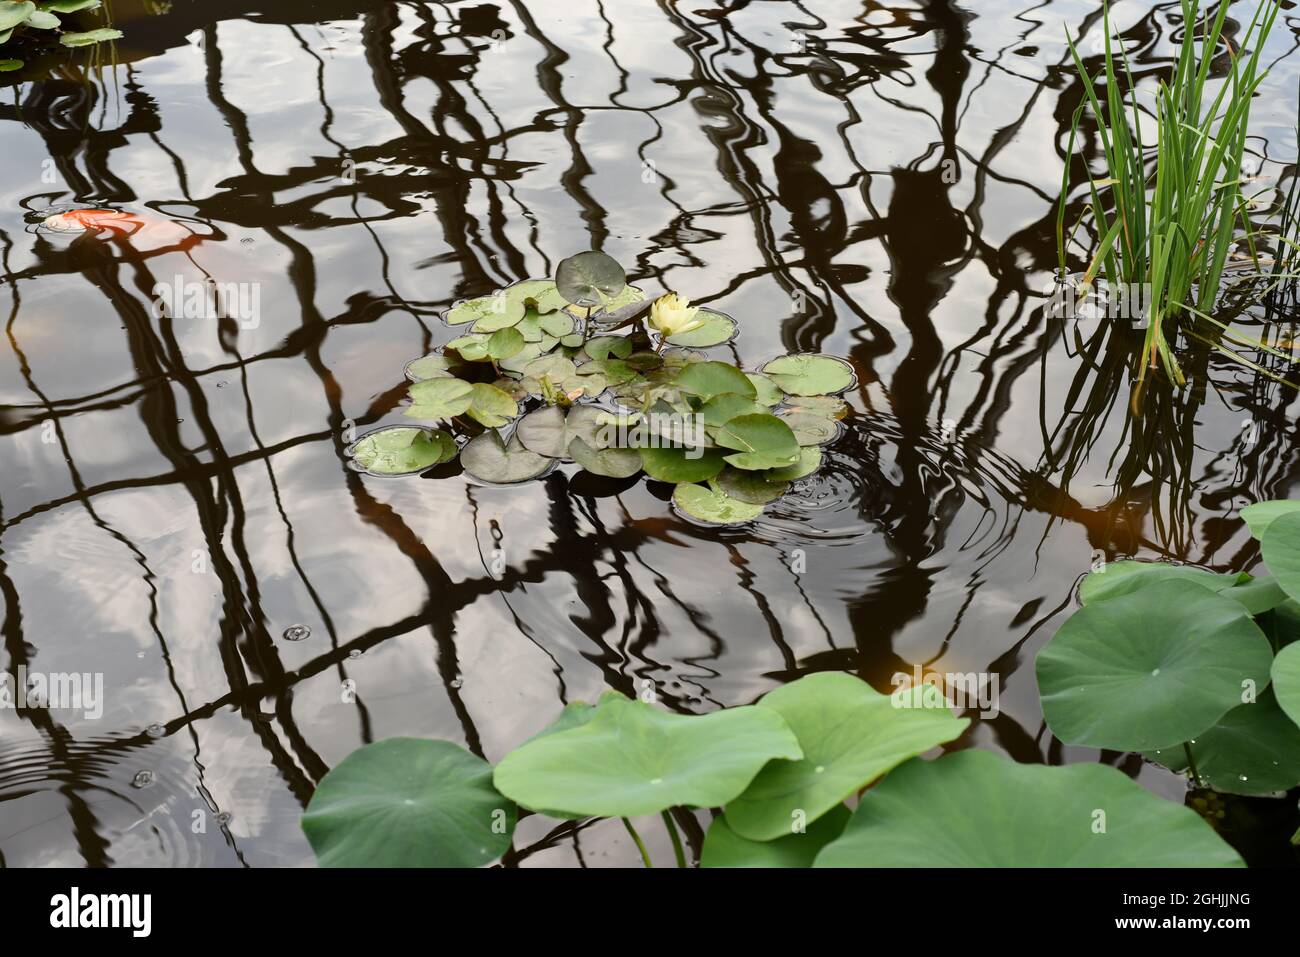 Lily pads and flowers on the surface in a decorative pond in the Muttart Conservatory botanical gardens and horticultural centre in Edmonton, Alberta, Stock Photo